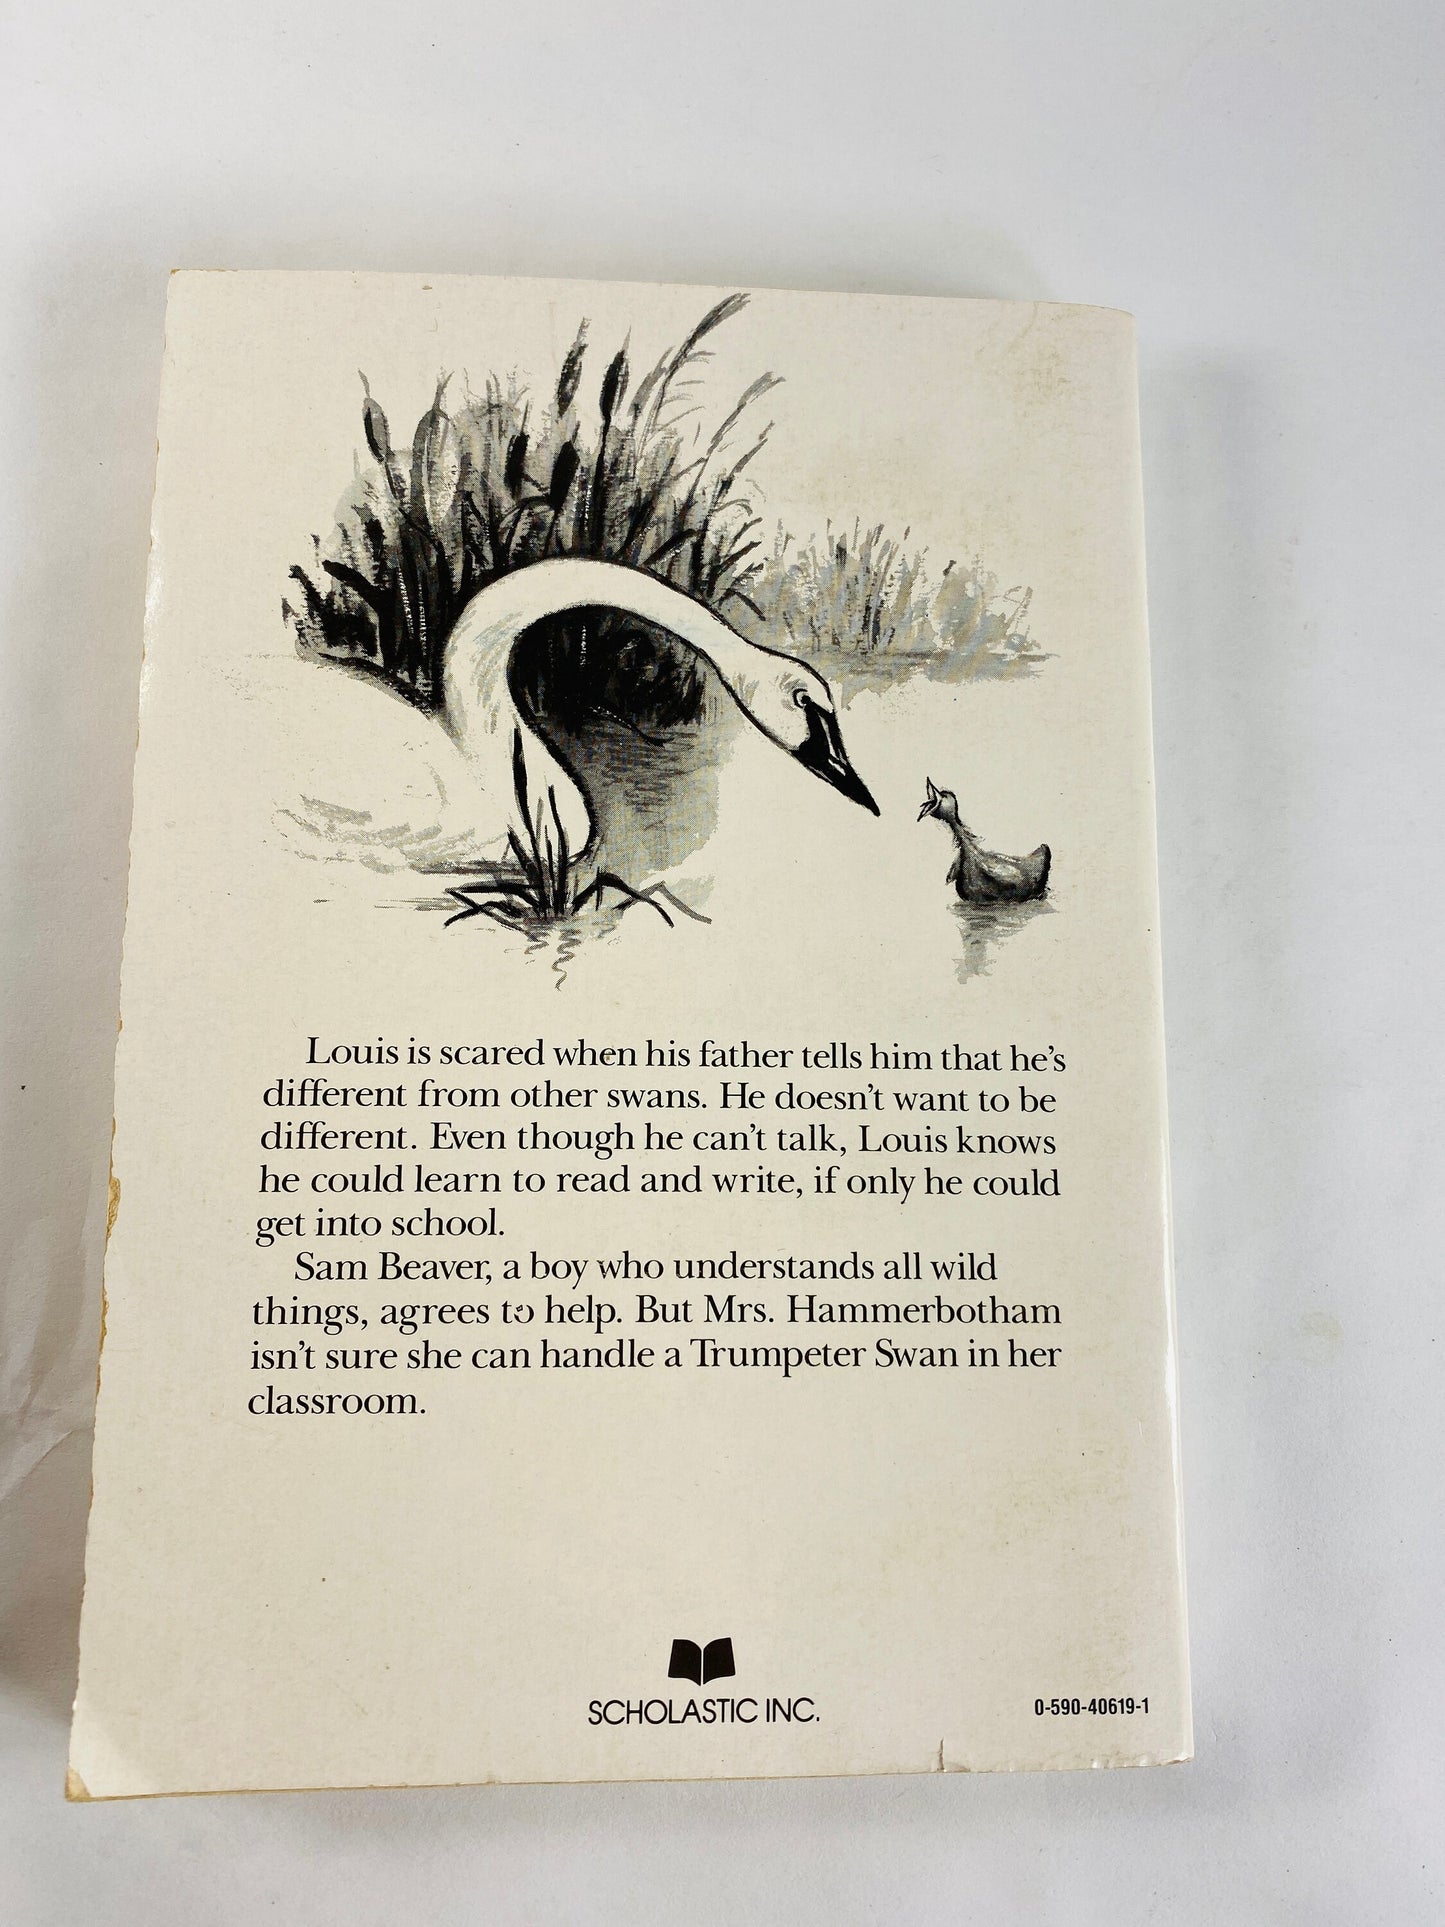 Trumpet of the Swan by EB White vintage paperback book illustrated by Edward Frascino Collector gift by author of Charlotte's Web circa 1987